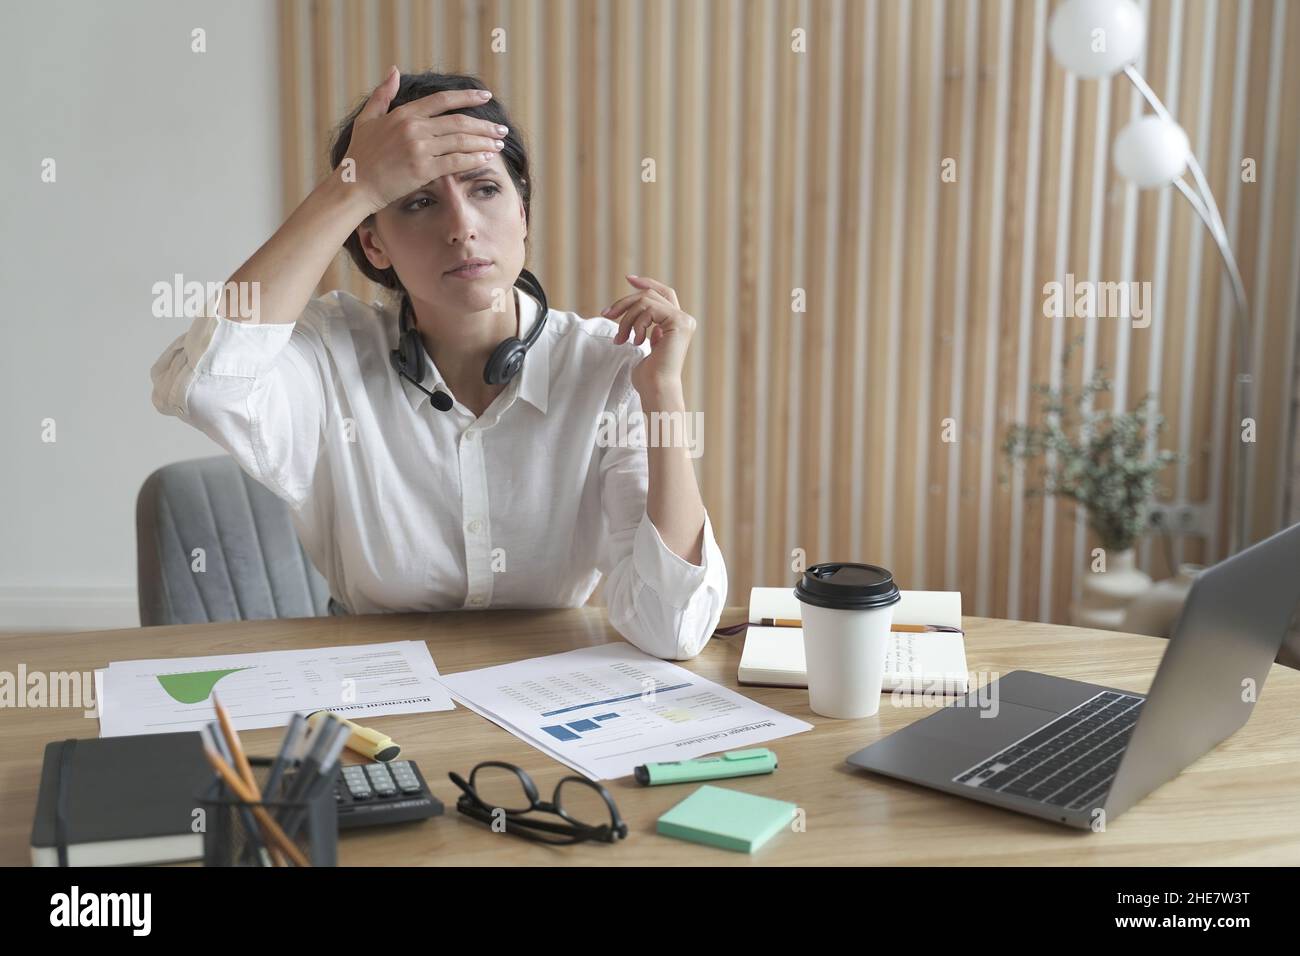 Overexhausted sick young italian woman office worker touching her forehead to check body temperature Stock Photo